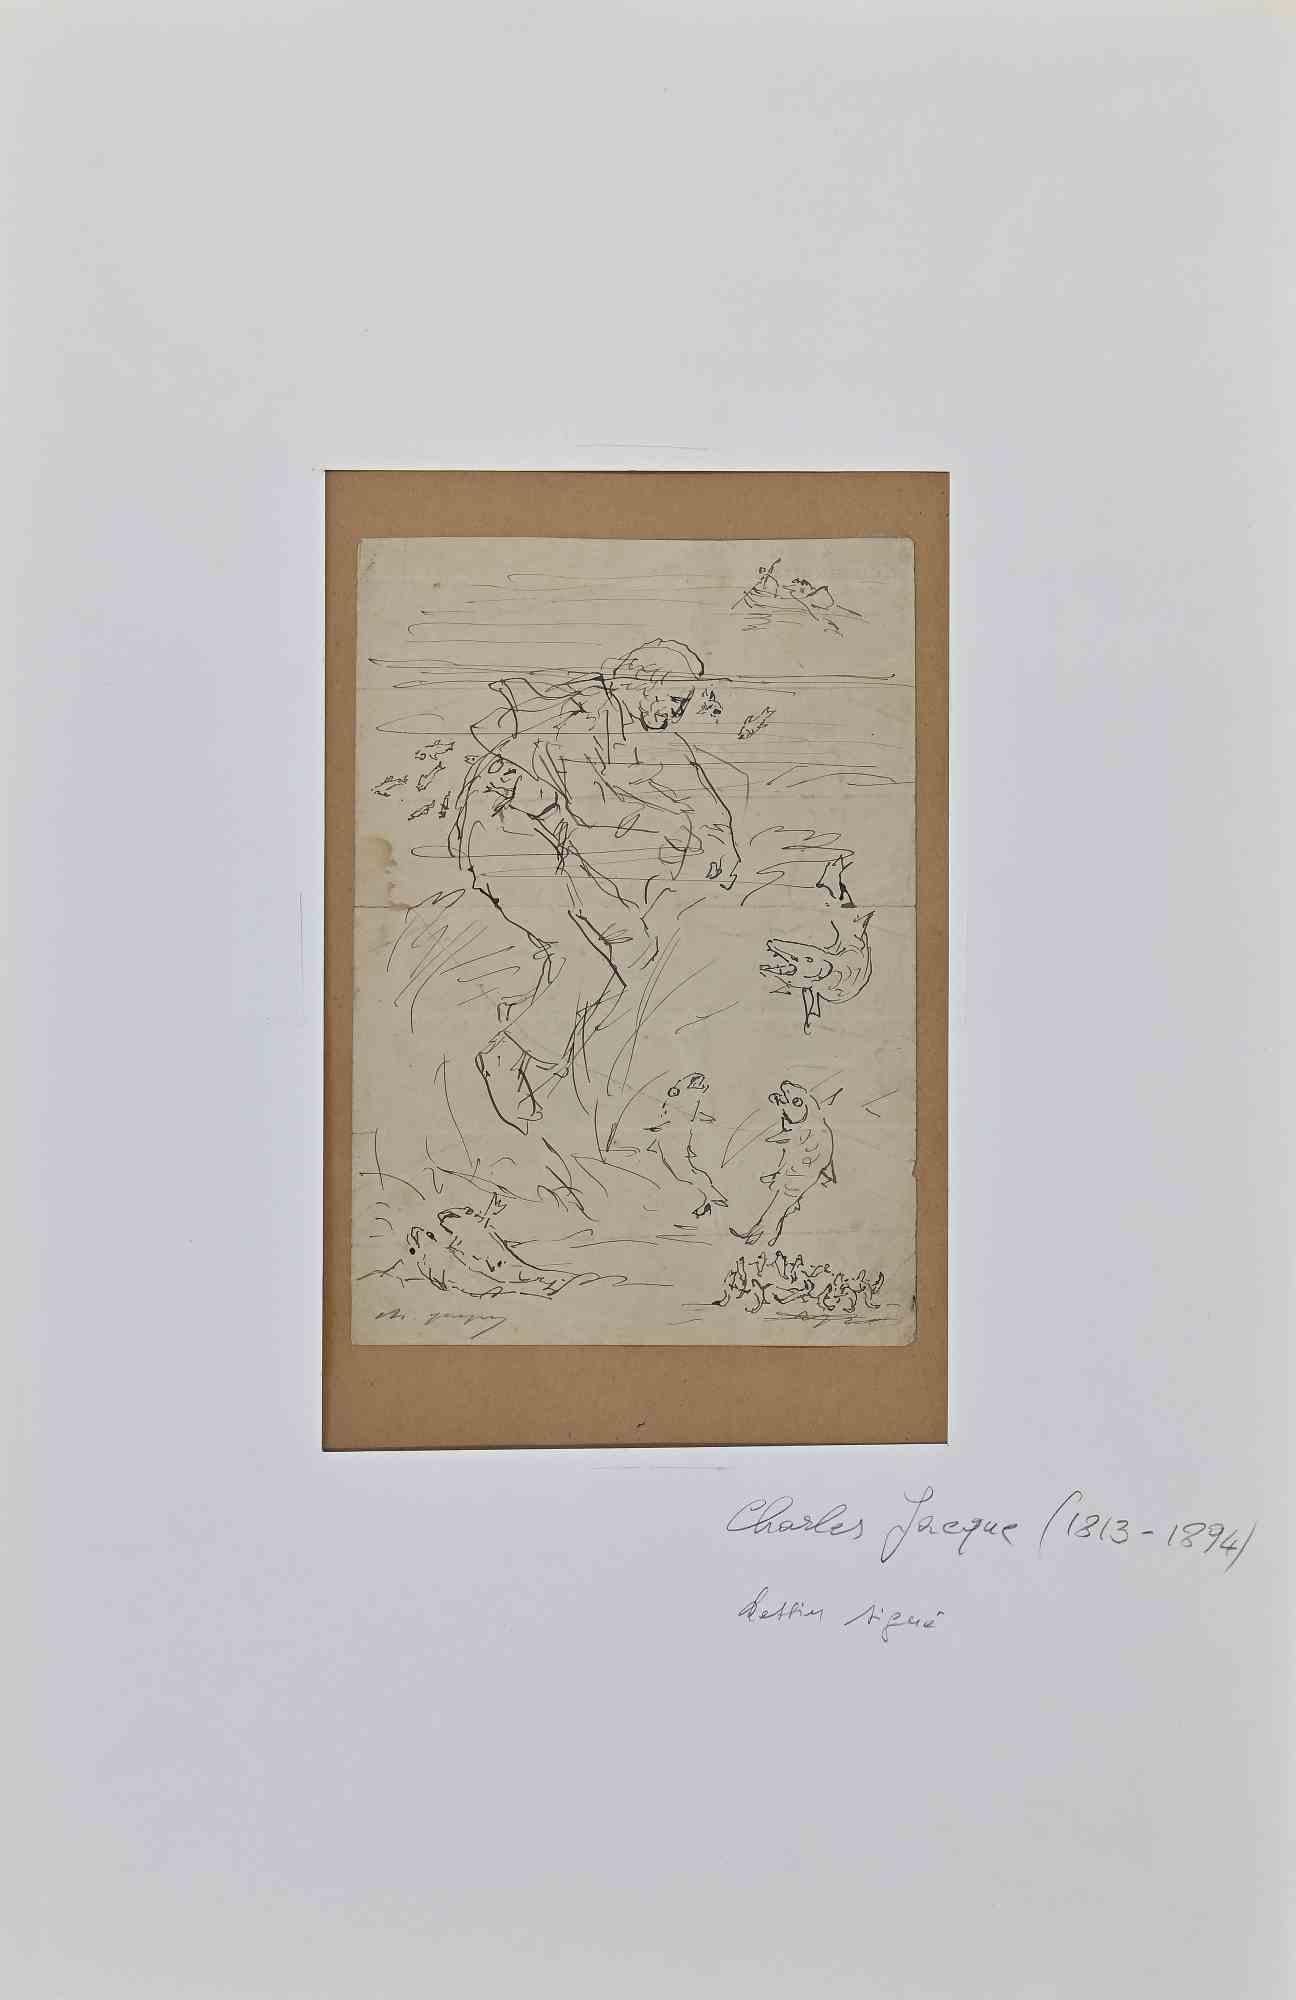 Fisherman - Original Drawing on Paper by Charles Jacque - Mid 19th Century - Art by Philippe Charles Jacquet